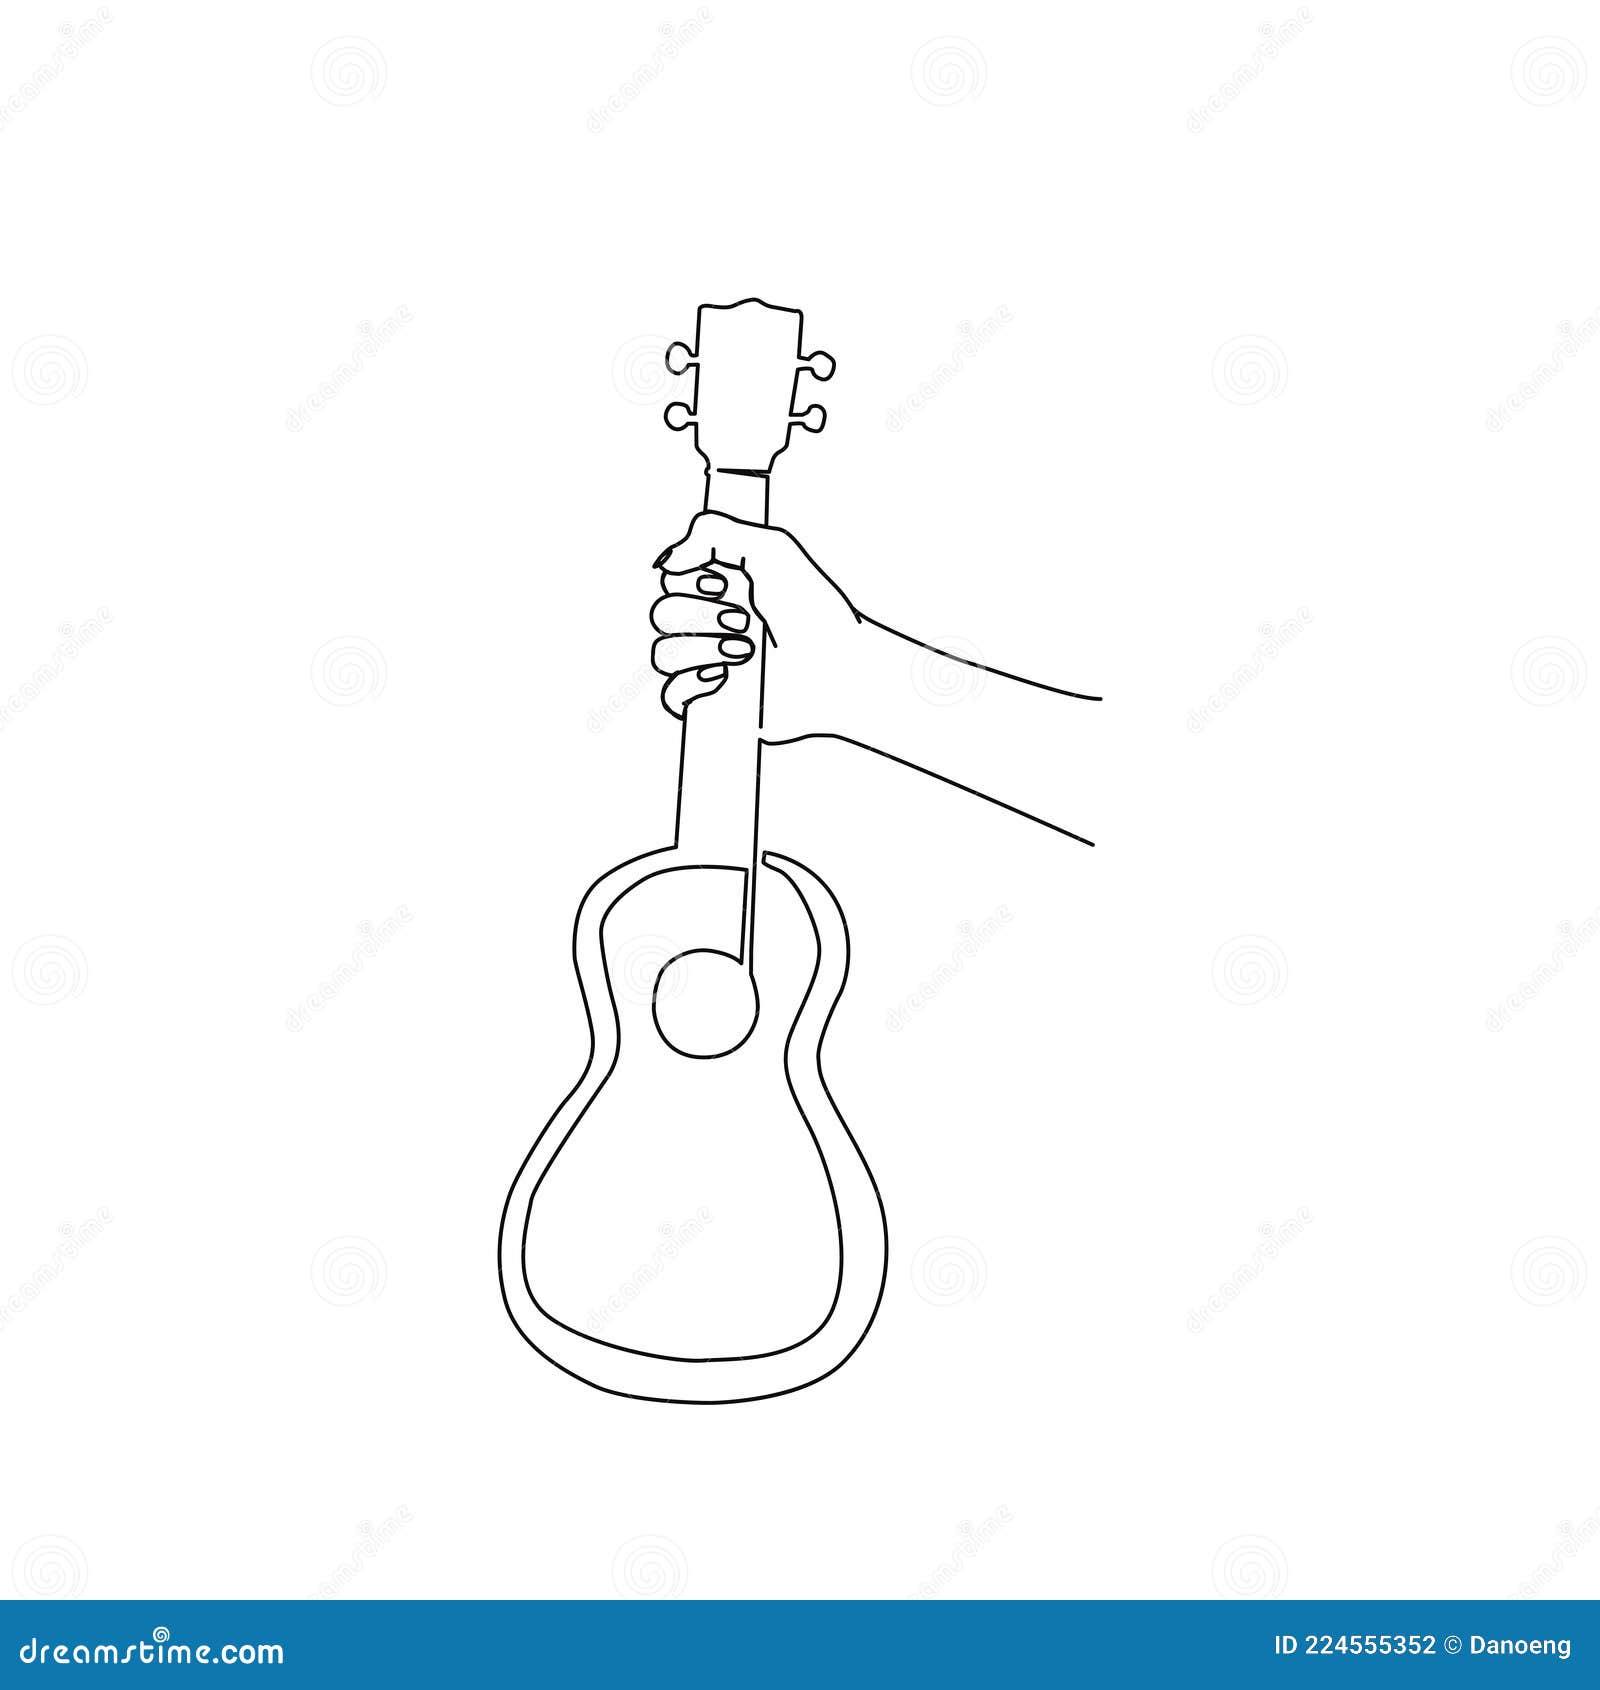 Continuous of Hand Holding Ukulele. Ukulele Line Art with Active Stroke Stock Vector - Illustration of editable, outline: 224555352